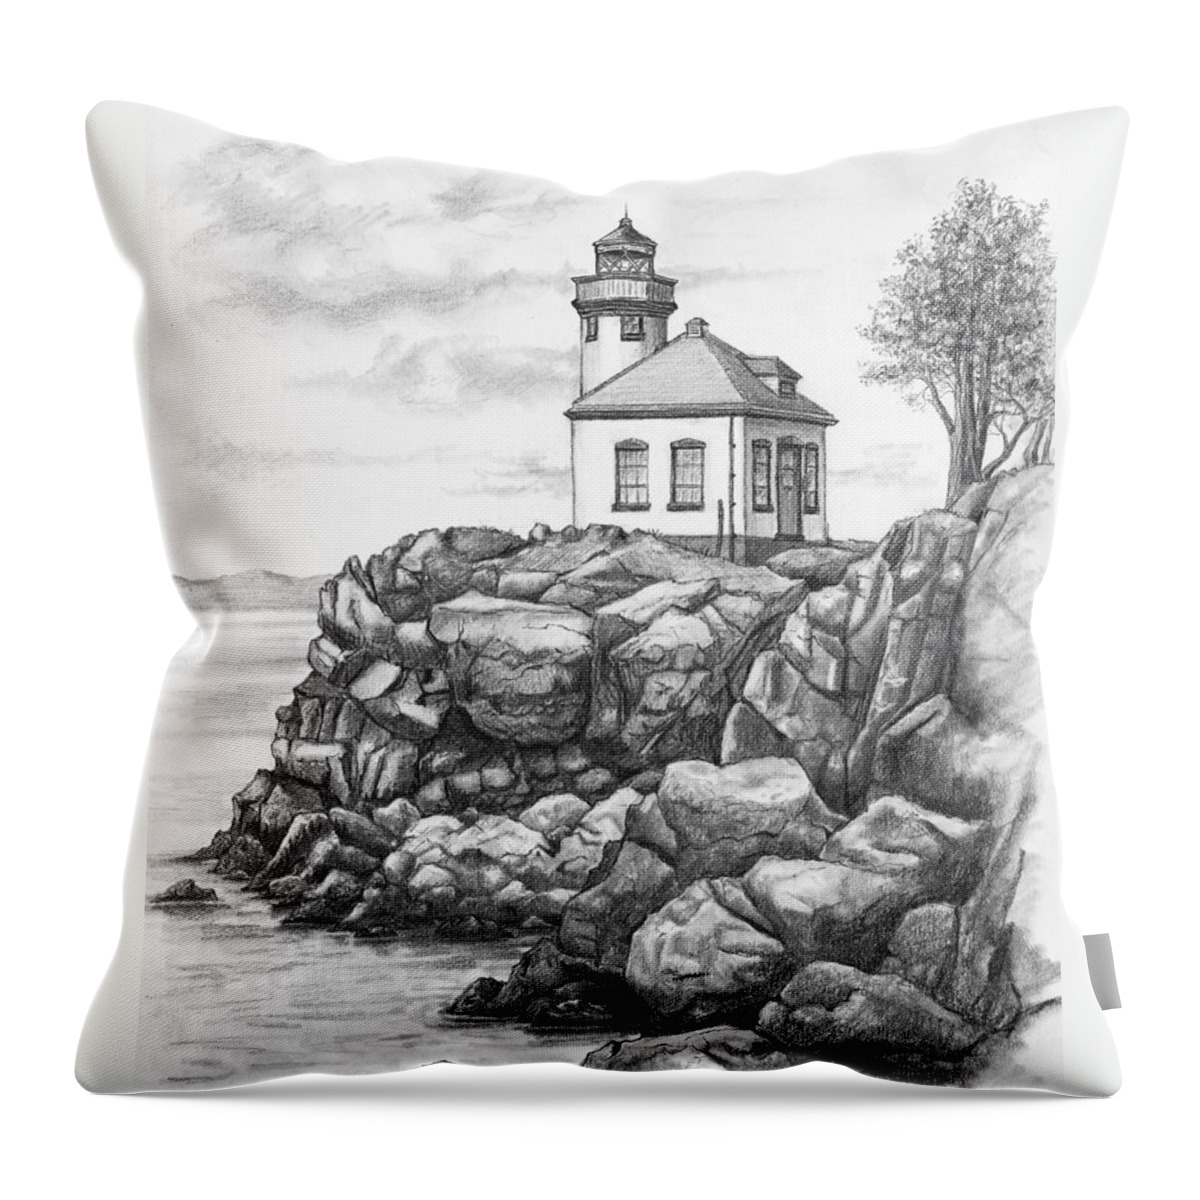 Lime Kiln Lighthouse Throw Pillow featuring the drawing Lime Kiln Lighthouse by Kim Lockman